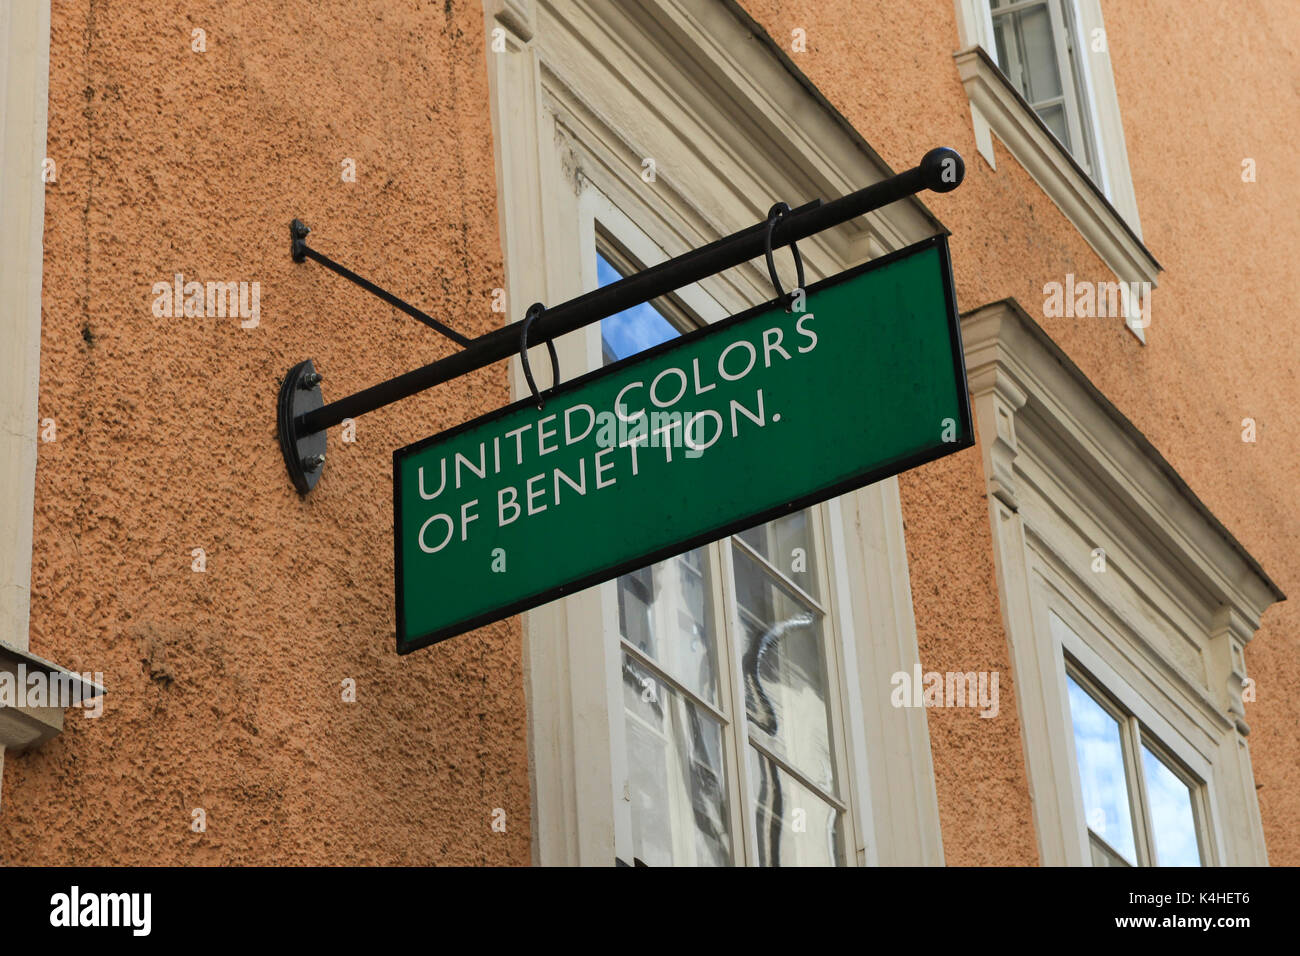 benetton, color, beneton, colors, united, sign, fashion, brand, store,  shop, editorial, clothing, company, white, designer, netherlands, outlet,  roerm Stock Photo - Alamy